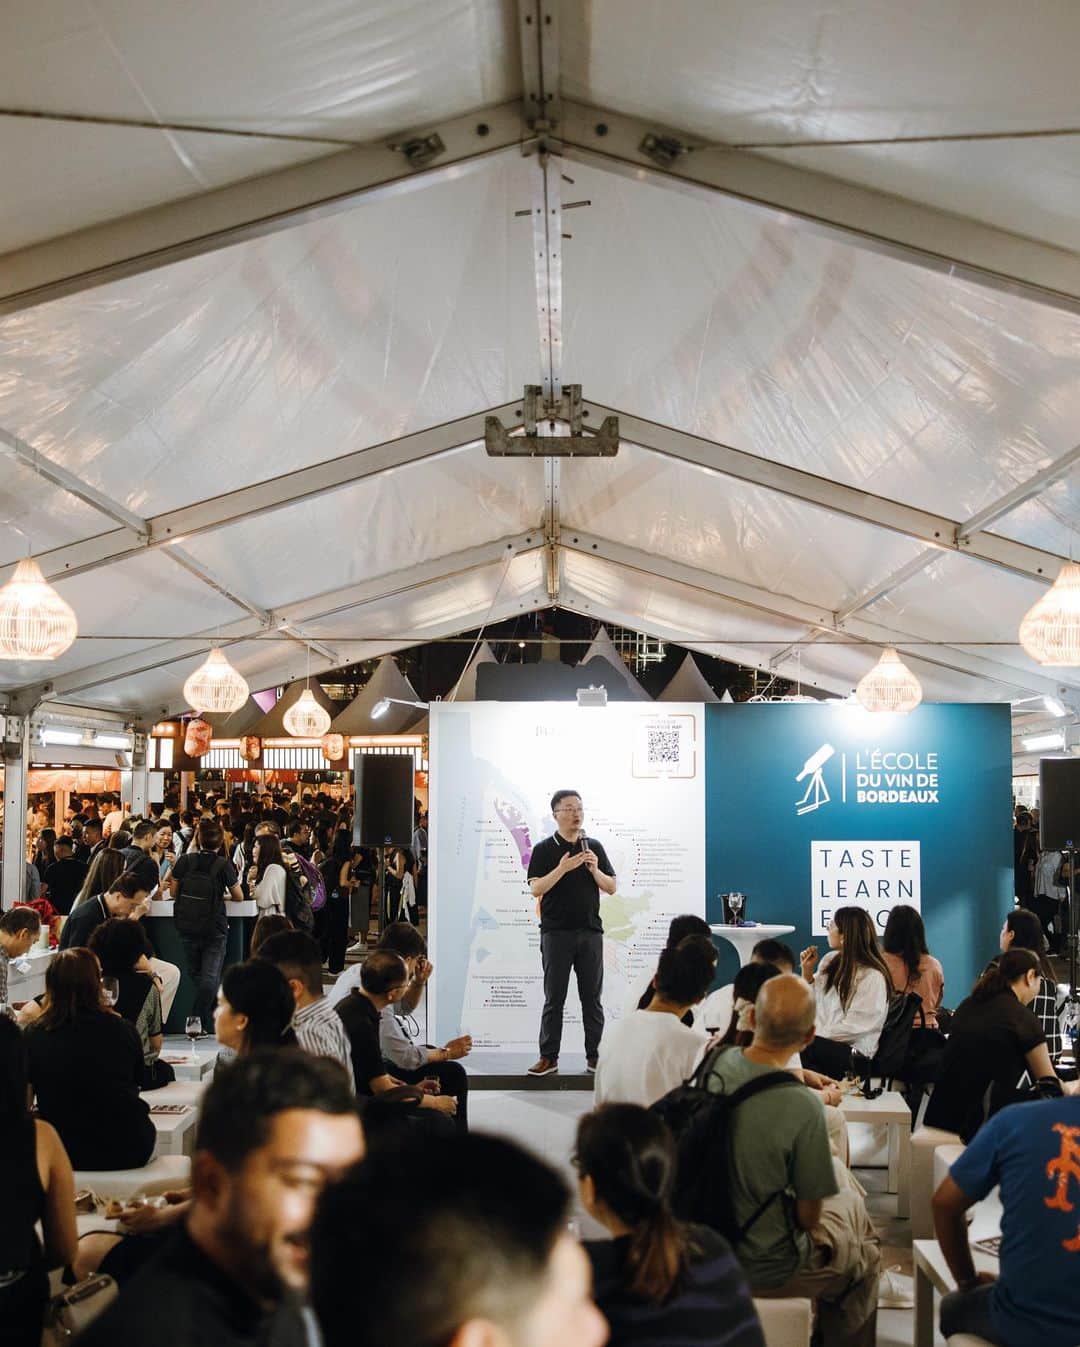 Discover Hong Kongさんのインスタグラム写真 - (Discover Hong KongInstagram)「[The Hong Kong Wine & Dine Festival is Here! 🎊🙌🎉] The highly anticipated Hong Kong Wine & Dine Festival kicked off with a bang! With around 300 booths, there’s a world of delicious global cuisines and beautiful wines🍷 waiting for you to explore. The venue is buzzing with live music and a variety of workshops against the stunning backdrop of Victoria Harbour. Gather your friends and join this indulgent event together, only until Sunday! Cheers to a fantastic time! 🥂  Hong Kong Wine & Dine Festival 2023 🗓️: 26–29 October 📍: Central Harbourfront Event Space, Hong Kong Island 🔗: https://bit.ly/3RvbBZo  In November, Taste Around Town is set to bring you the best from our local food and drink scene with over 300 restaurant offers!  【香港美酒佳餚巡禮開鑼喇🎊🙌🎉】 全城期待嘅香港美酒佳餚巡禮第一晚已經超精采，場內約300個攤位，排住隊等你嚟品嚐環球美食同各國靚酒🍷！現場仲有音樂表演同各式工作坊，配合埋維港靚景就最perfect啦！咁多精采節目一日又點玩得唒？大家快啲叫埋班friend，約定你，飲到星期日！Cheers！  2023香港美酒佳餚巡禮 🗓️: 10月26日至29日 📍: 中環海濱活動空間 🔗: https://bit.ly/3rxt1Kf  緊接11月「品味全城」，齊集逾300間精彩優惠餐廳，本地名廚炮製大師發辦及特色雞尾酒之旅， 帶你食盡全城！  #WineAndDine2023 #HelloHongKong #DiscoverHongKong  🍷😋🍷😋🍷😋🍷😋🍷😋🍷😋🍷😋🍷😋🍷😋 What else can you do at night in Hong Kong?🌃 Stay tuned for our #HongKongAfter6 !👀 想知嚟緊夜晚有乜玩？🌃記得跟貼我哋嘅 #HongKongAfter6 ，更多節日盛事、玩樂好去處等緊你！👀」10月27日 1時44分 - discoverhongkong